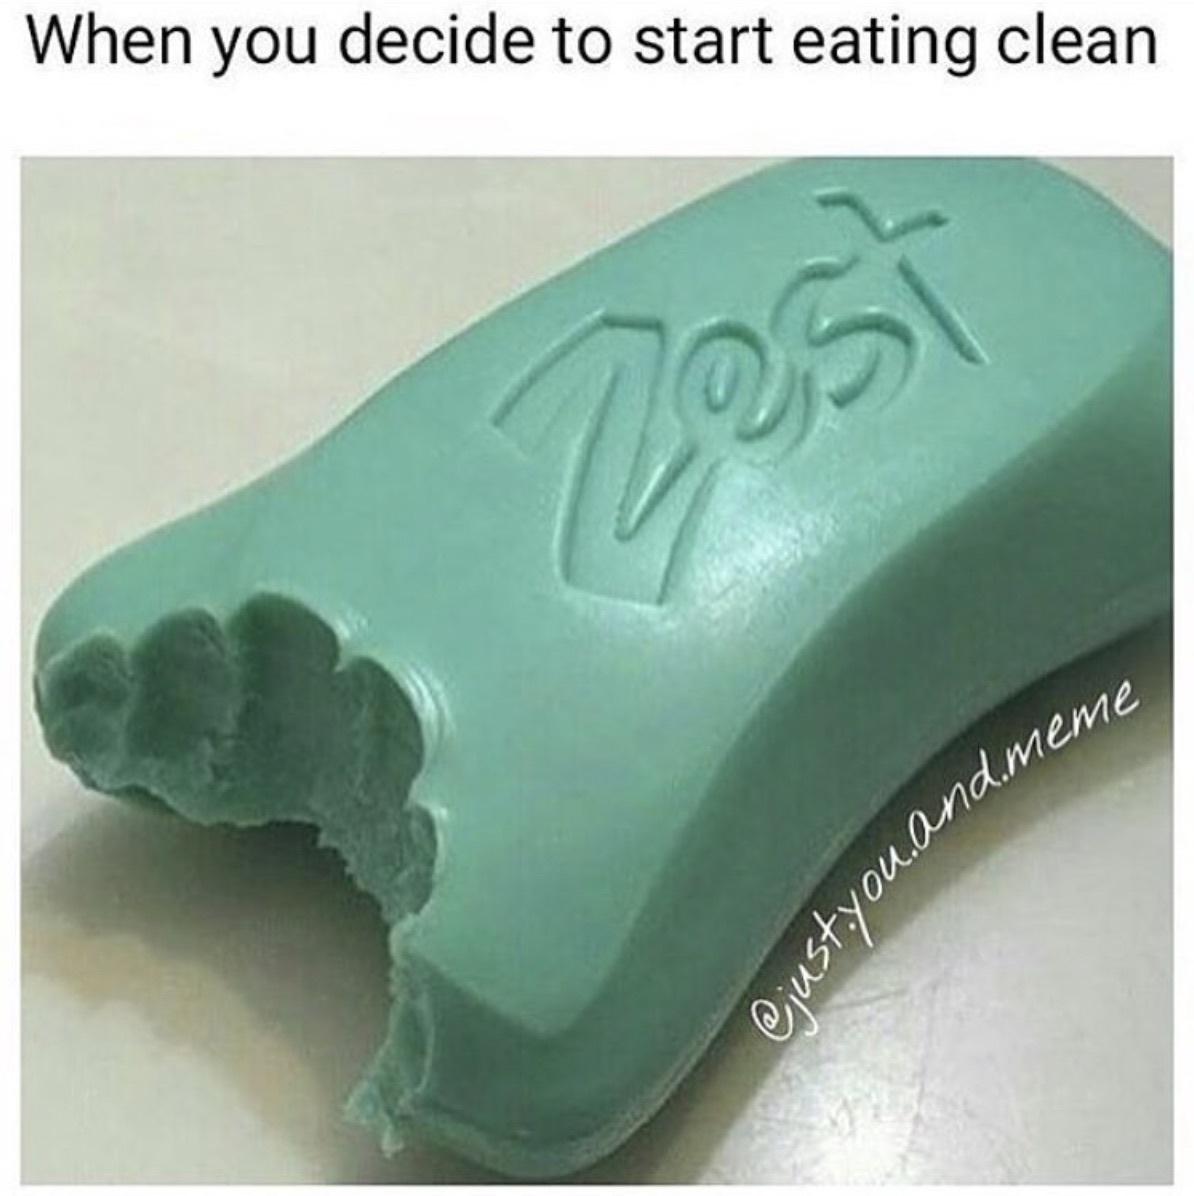 monday morning randomness - clean fresh funny memes - When you decide to start eating clean Zest you.and.meme